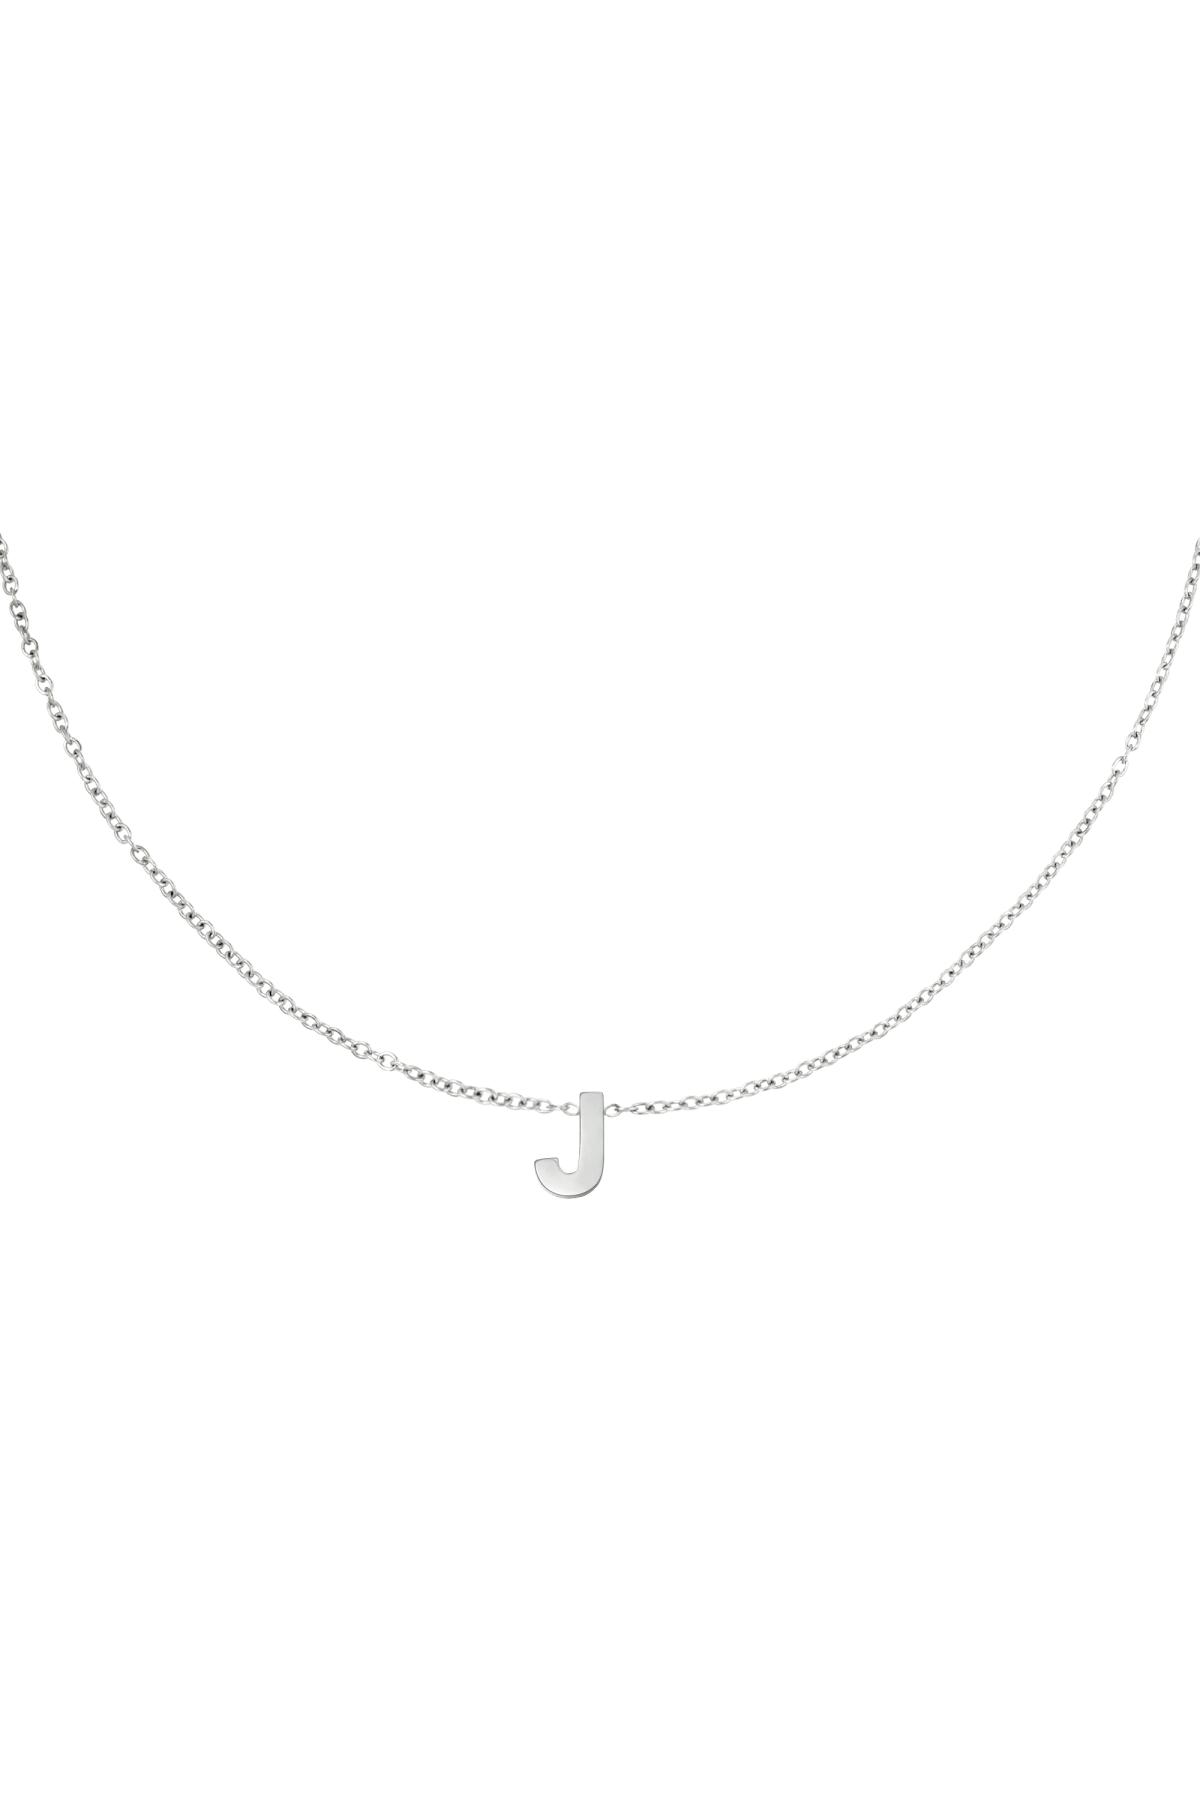 Stainless steel necklace initial J Silver